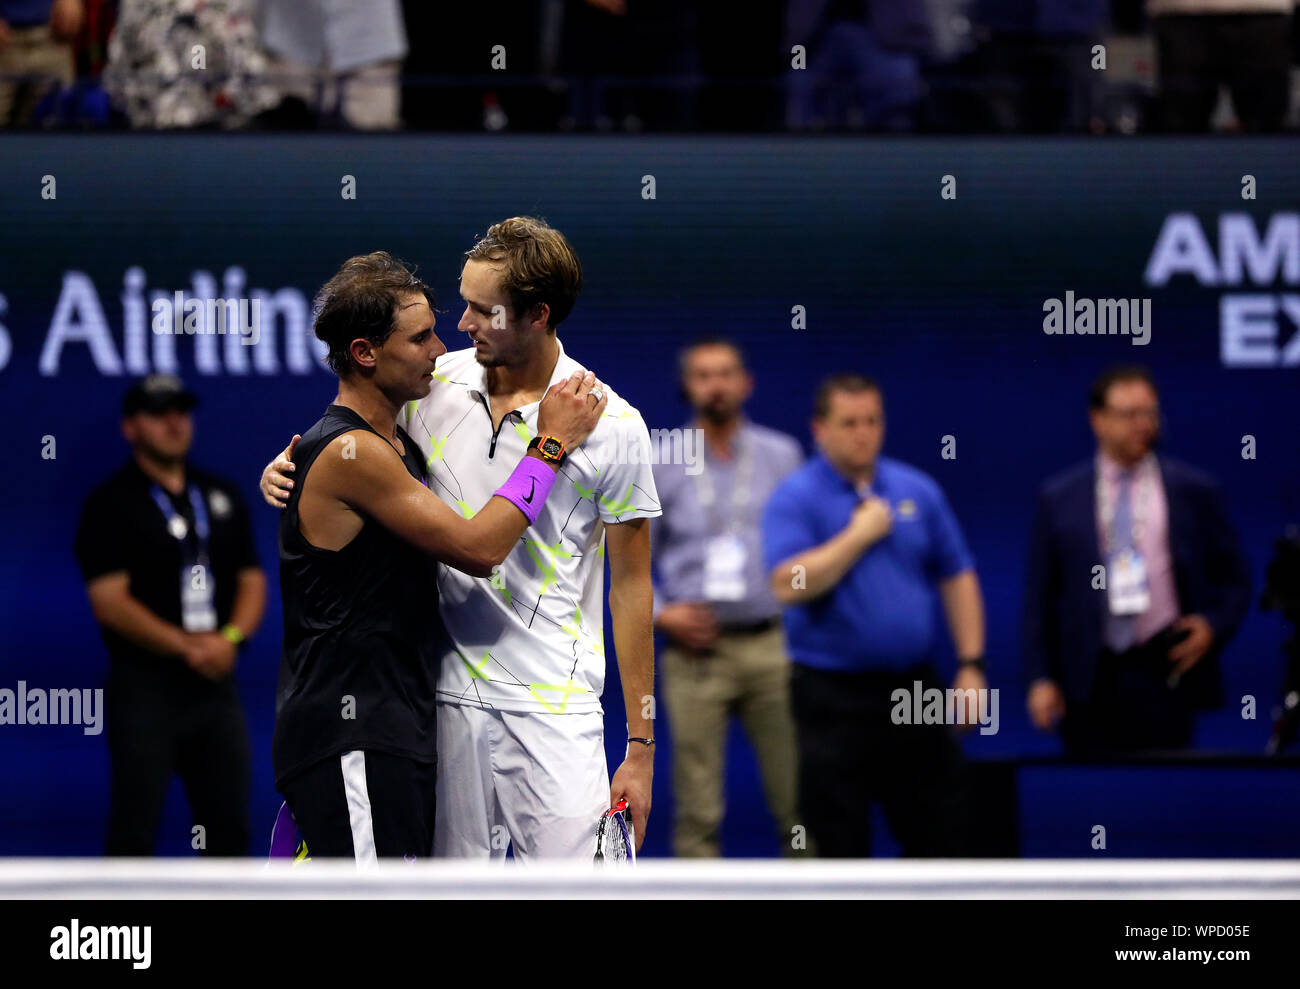 New York, United States. 08th Sep, 2019. Flushing Meadows, New York, United States - September 8, 2019. Rafael Nadal of Spain and Daniil Medvedev embrace after Nadal defeated Medvedev five sets in the men's final to win the US Open today. It was Nadal's fourth US Open title. Credit: Adam Stoltman/Alamy Live News Stock Photo